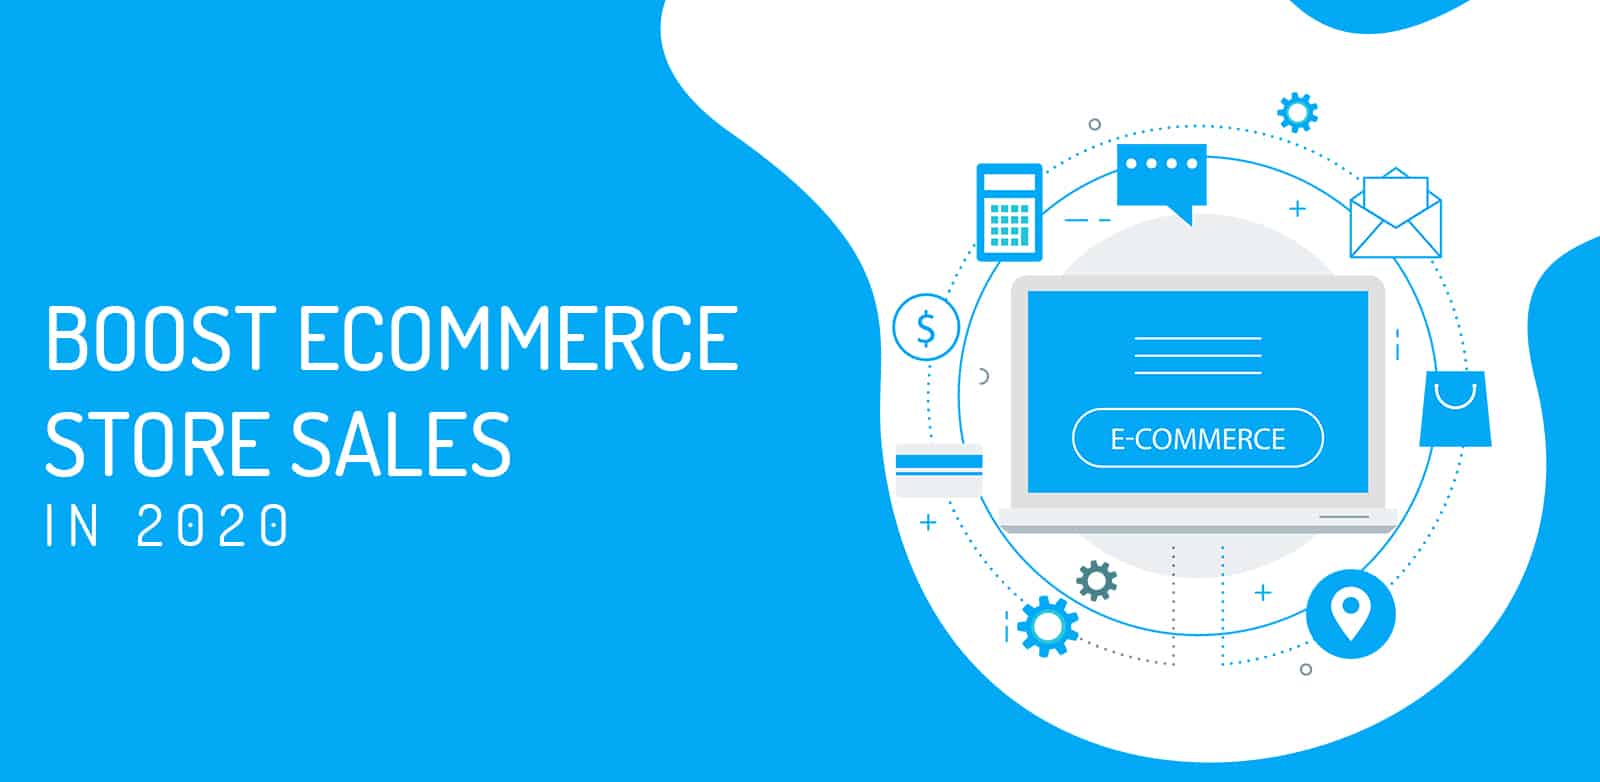 Boost eCommerce Store Sales in 2020